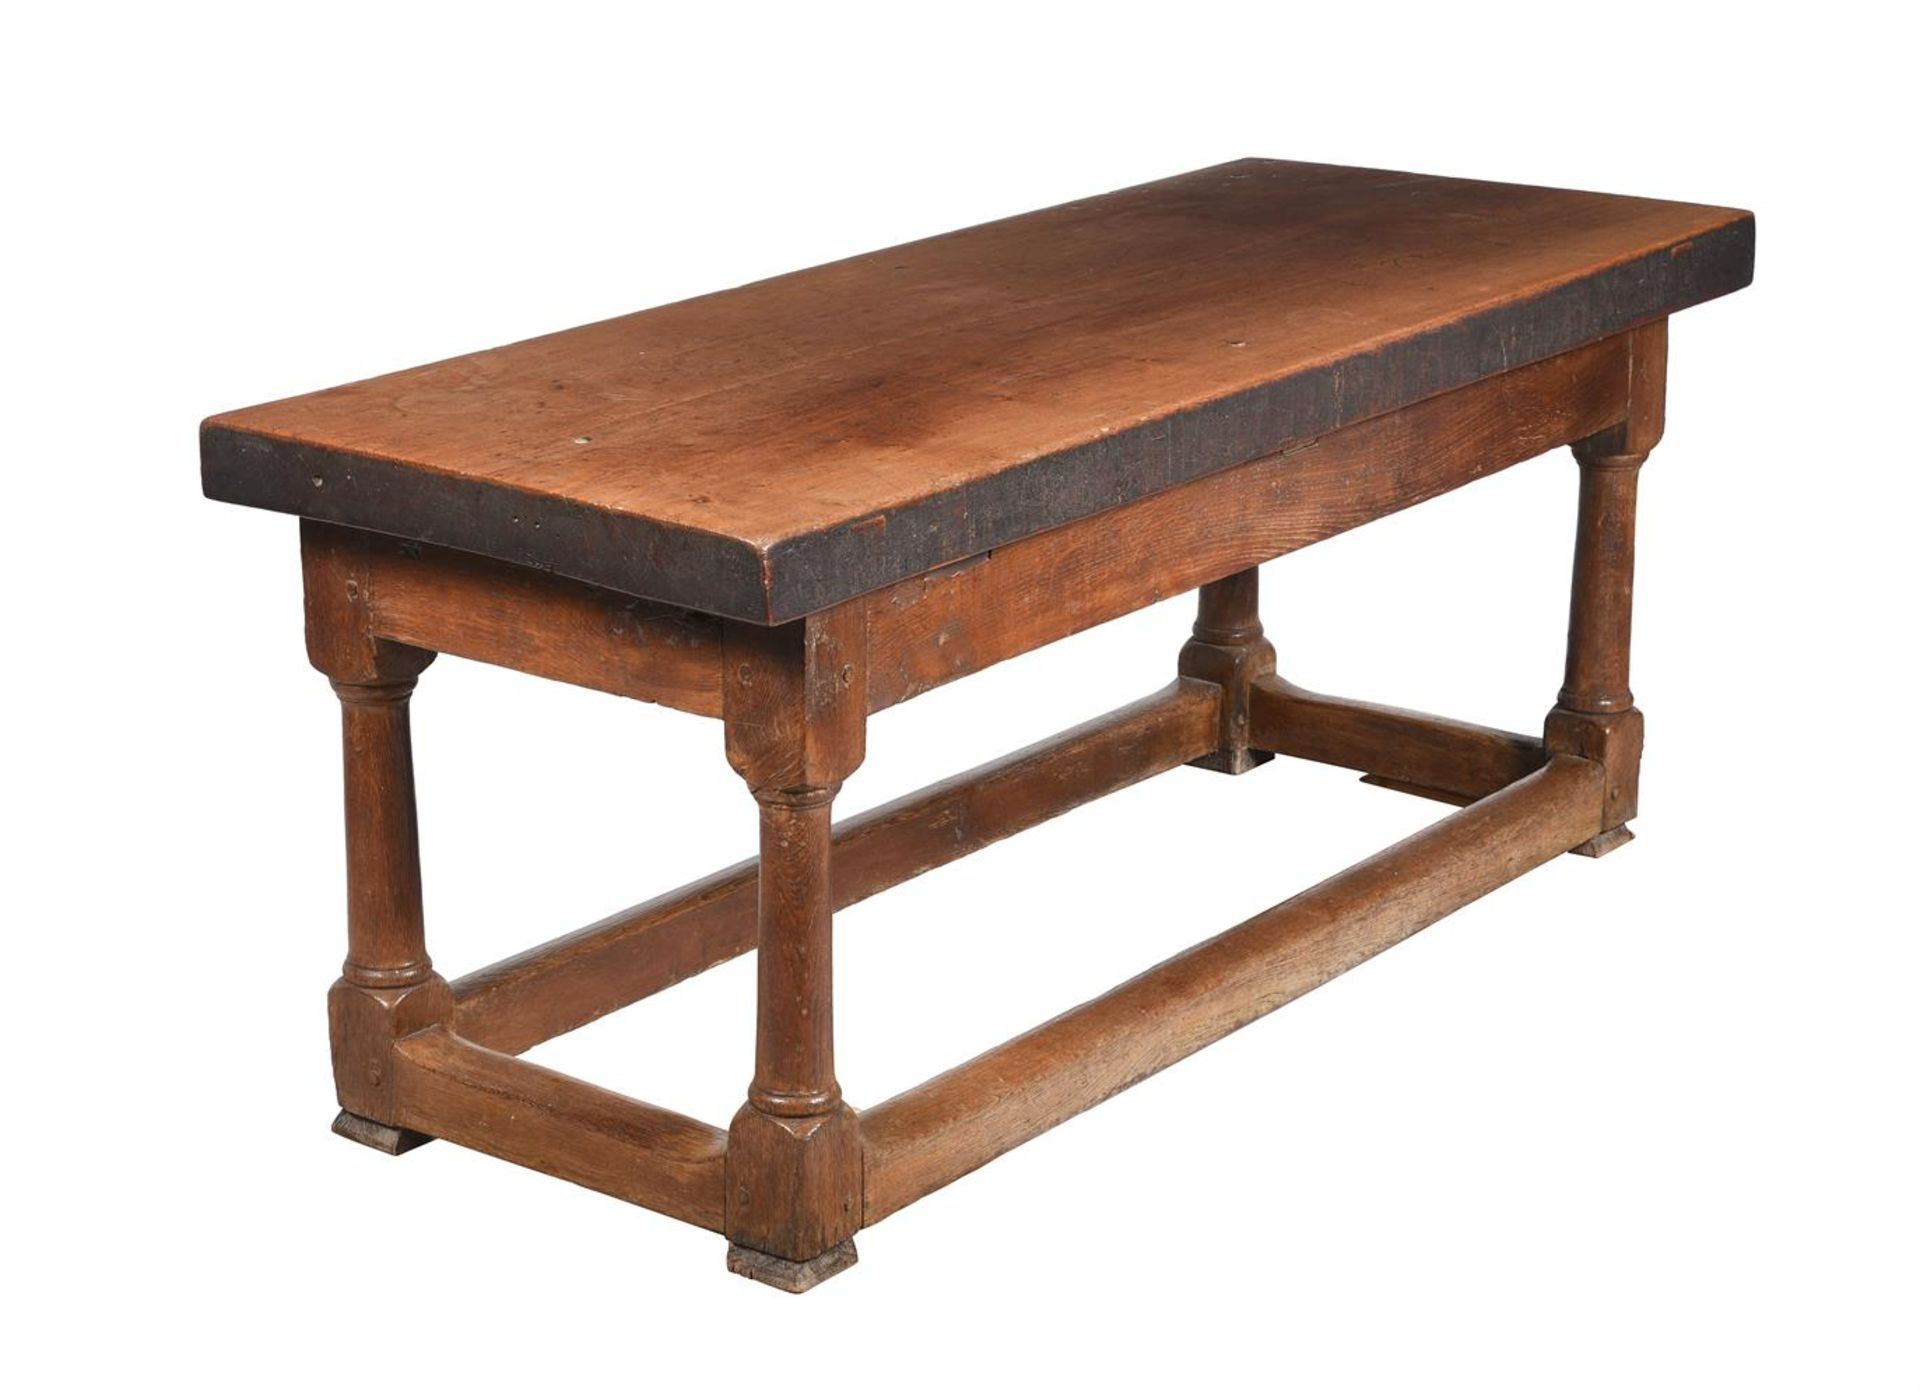 A LARGE OAK AND WALNUT REFECTORY TABLE, MID 19TH CENTURY